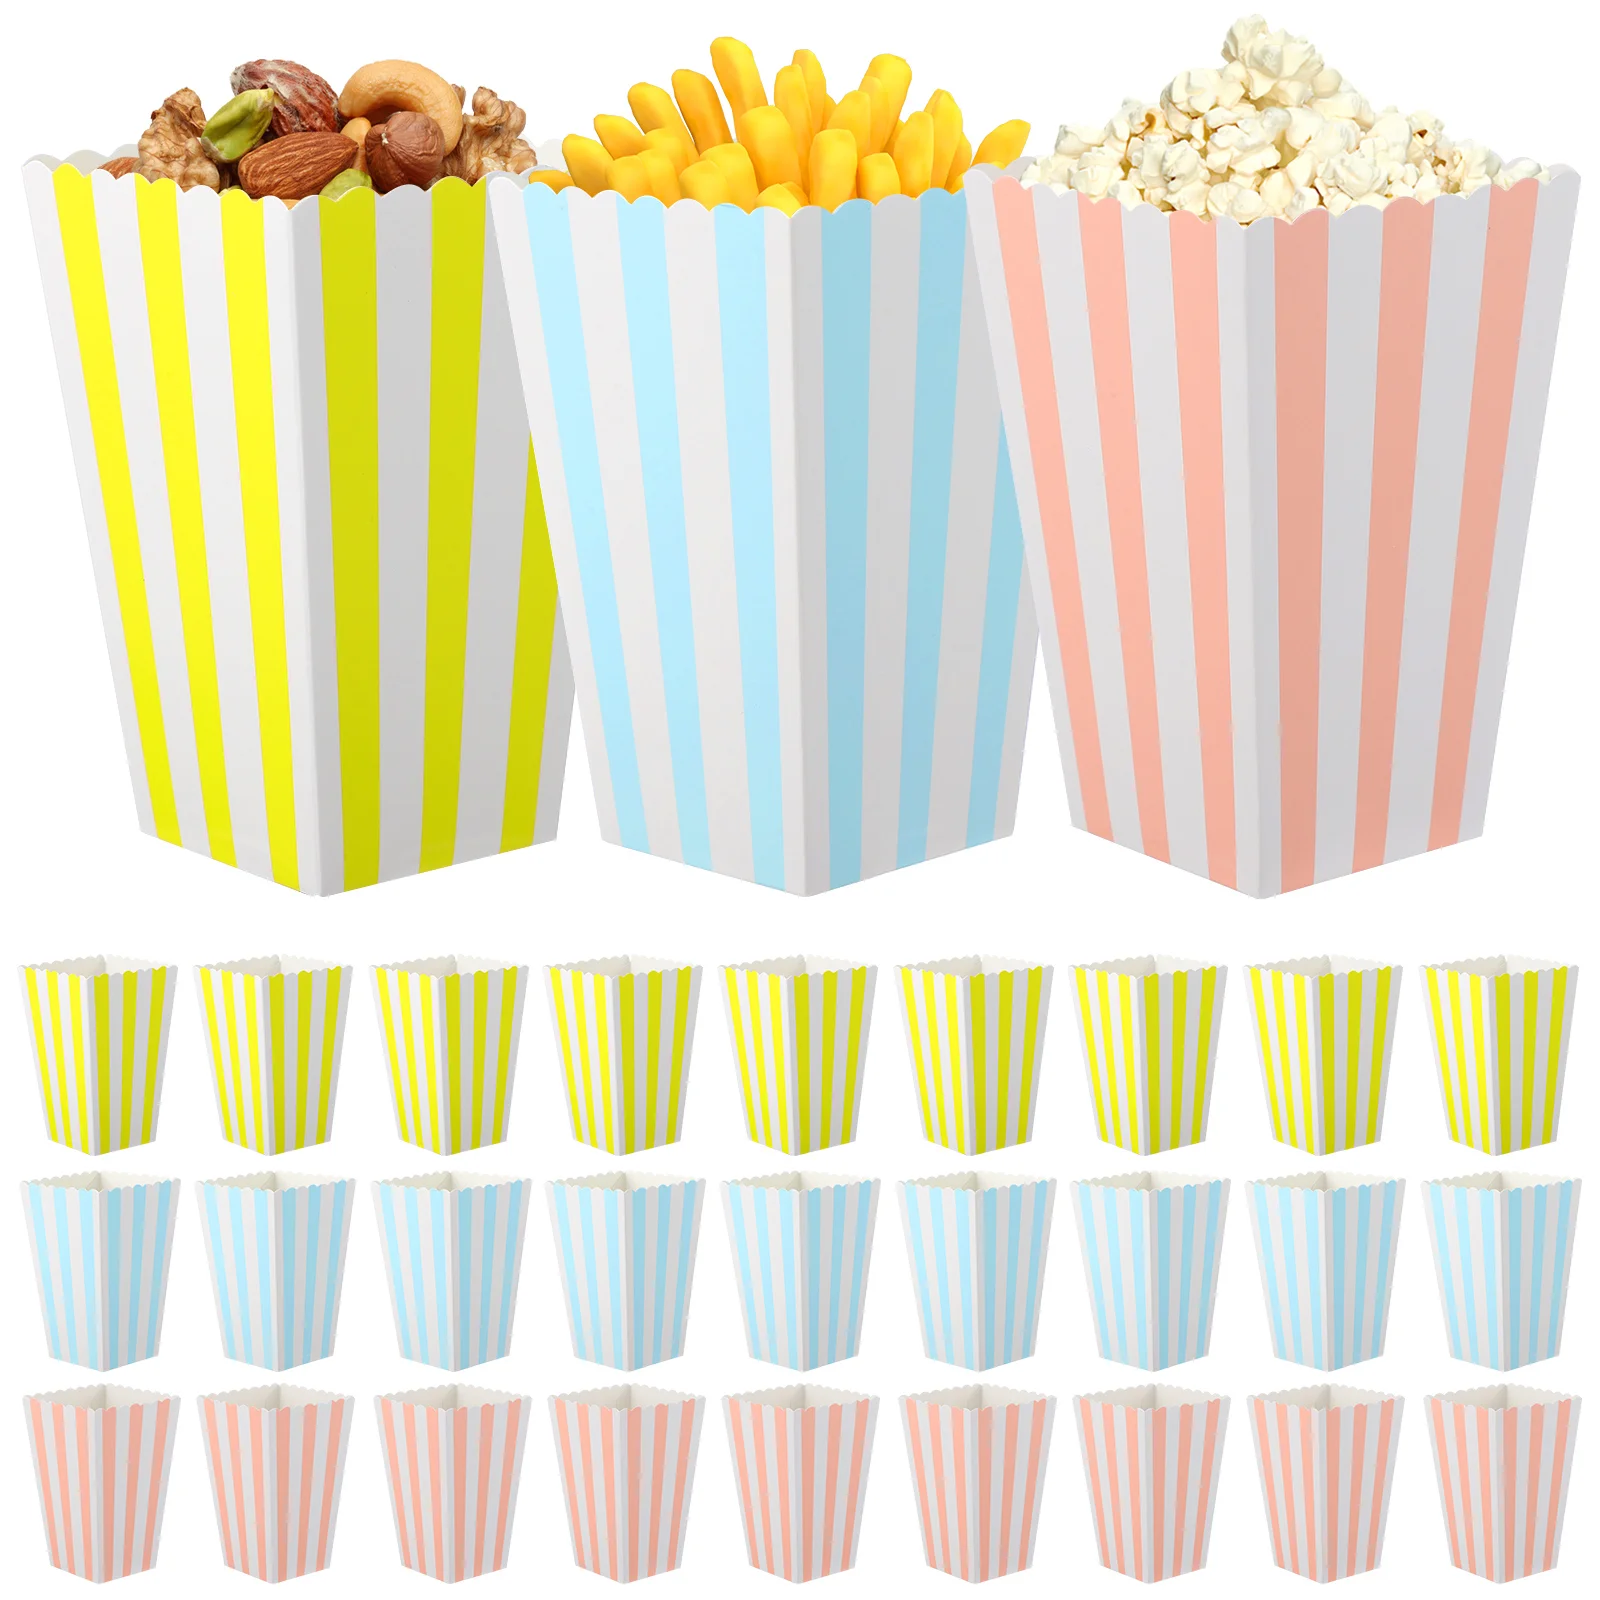 

60 Pcs Carton Stripe Popcorn Boxes Cookie Container Containers Buckets Large Ordinary Snack